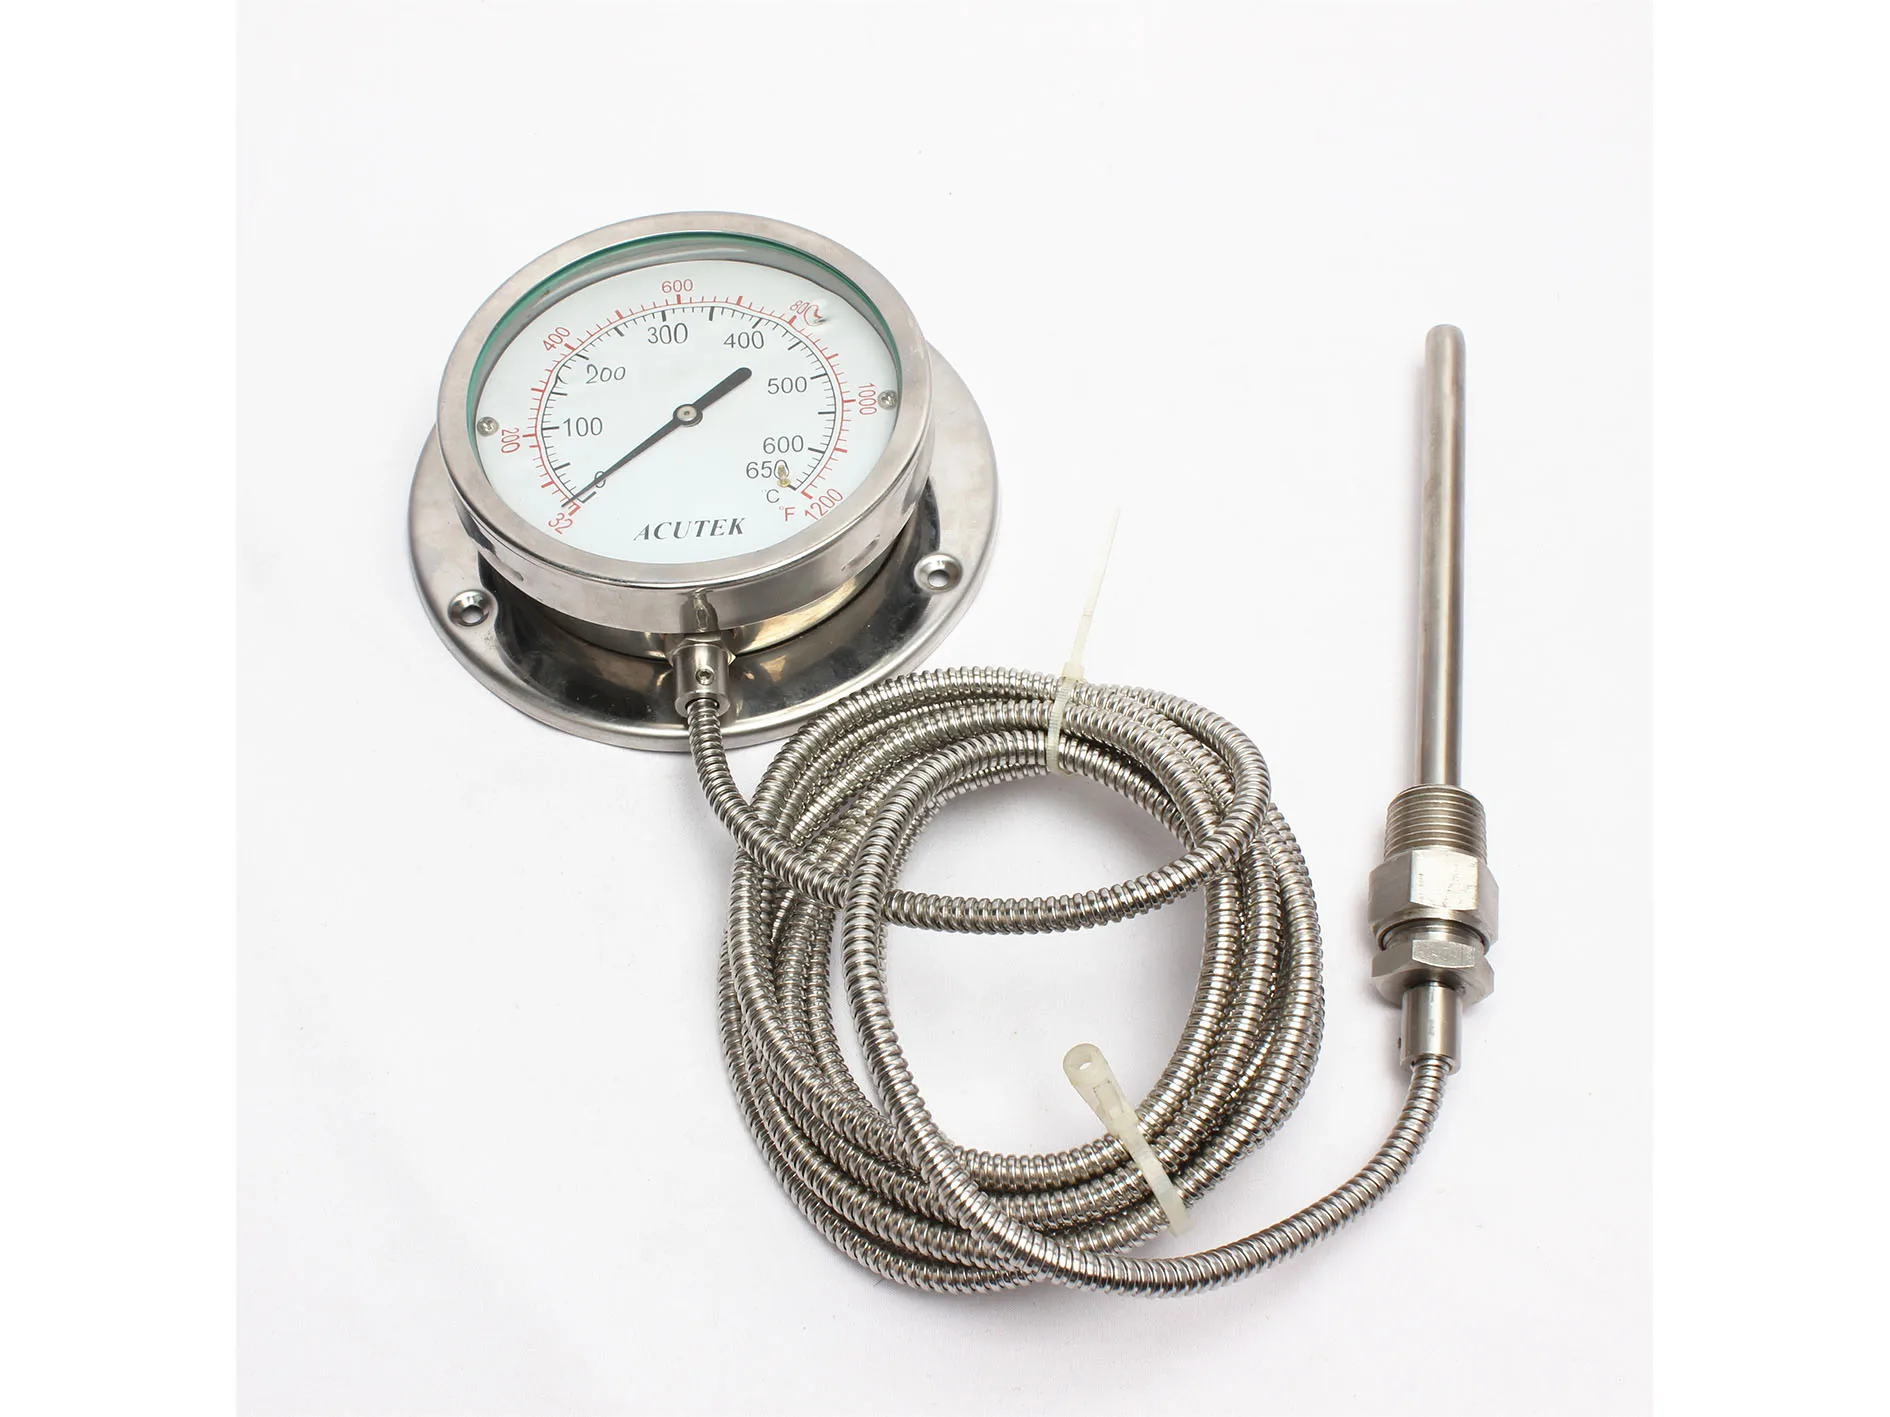 Stainless Steel Industrial Marine Pressure Gauge Dial Thermometer Capillary